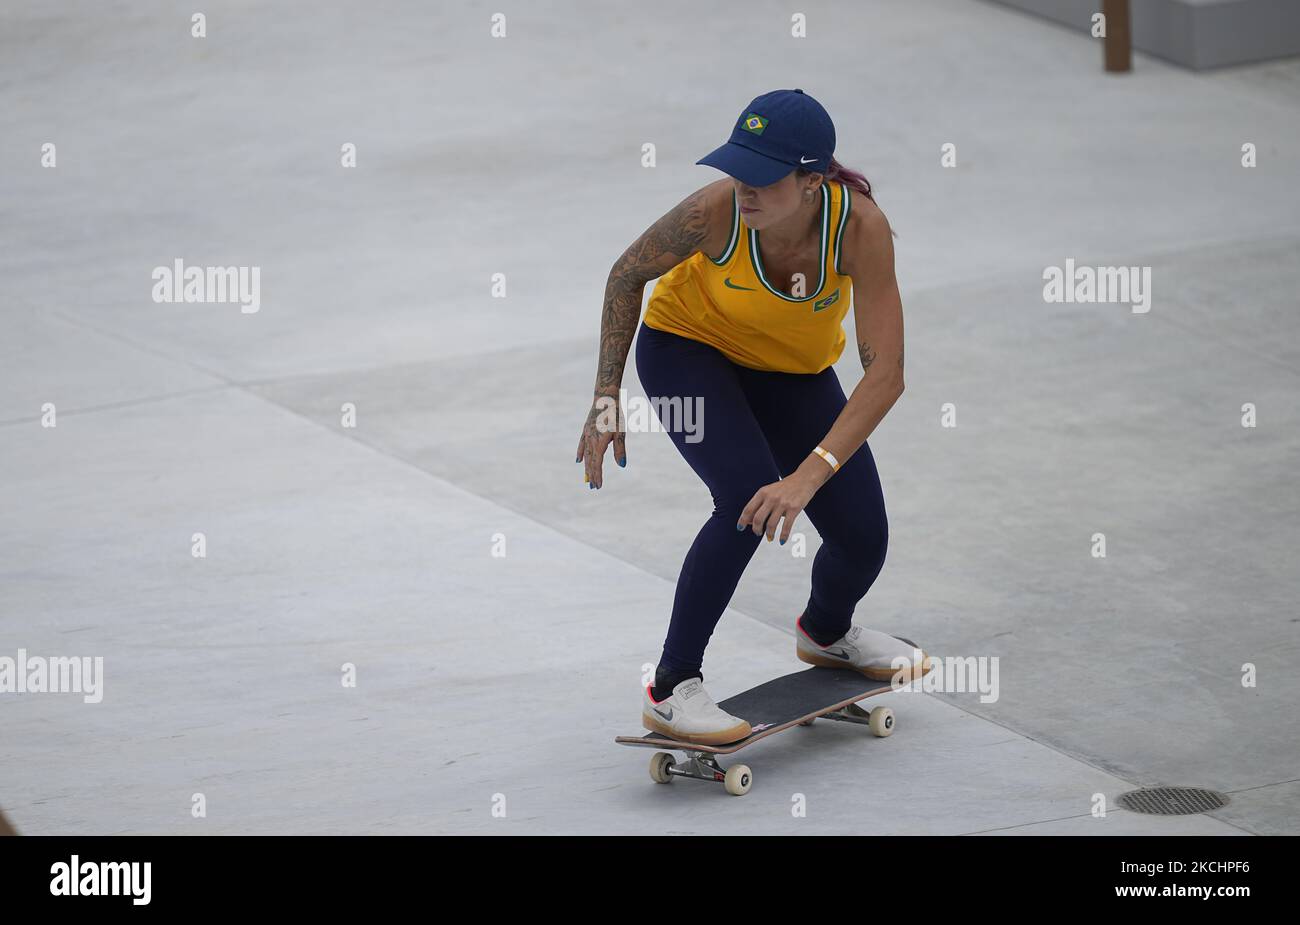 Leticia Bufoni During Women S Street Skateboard At The Olympics At